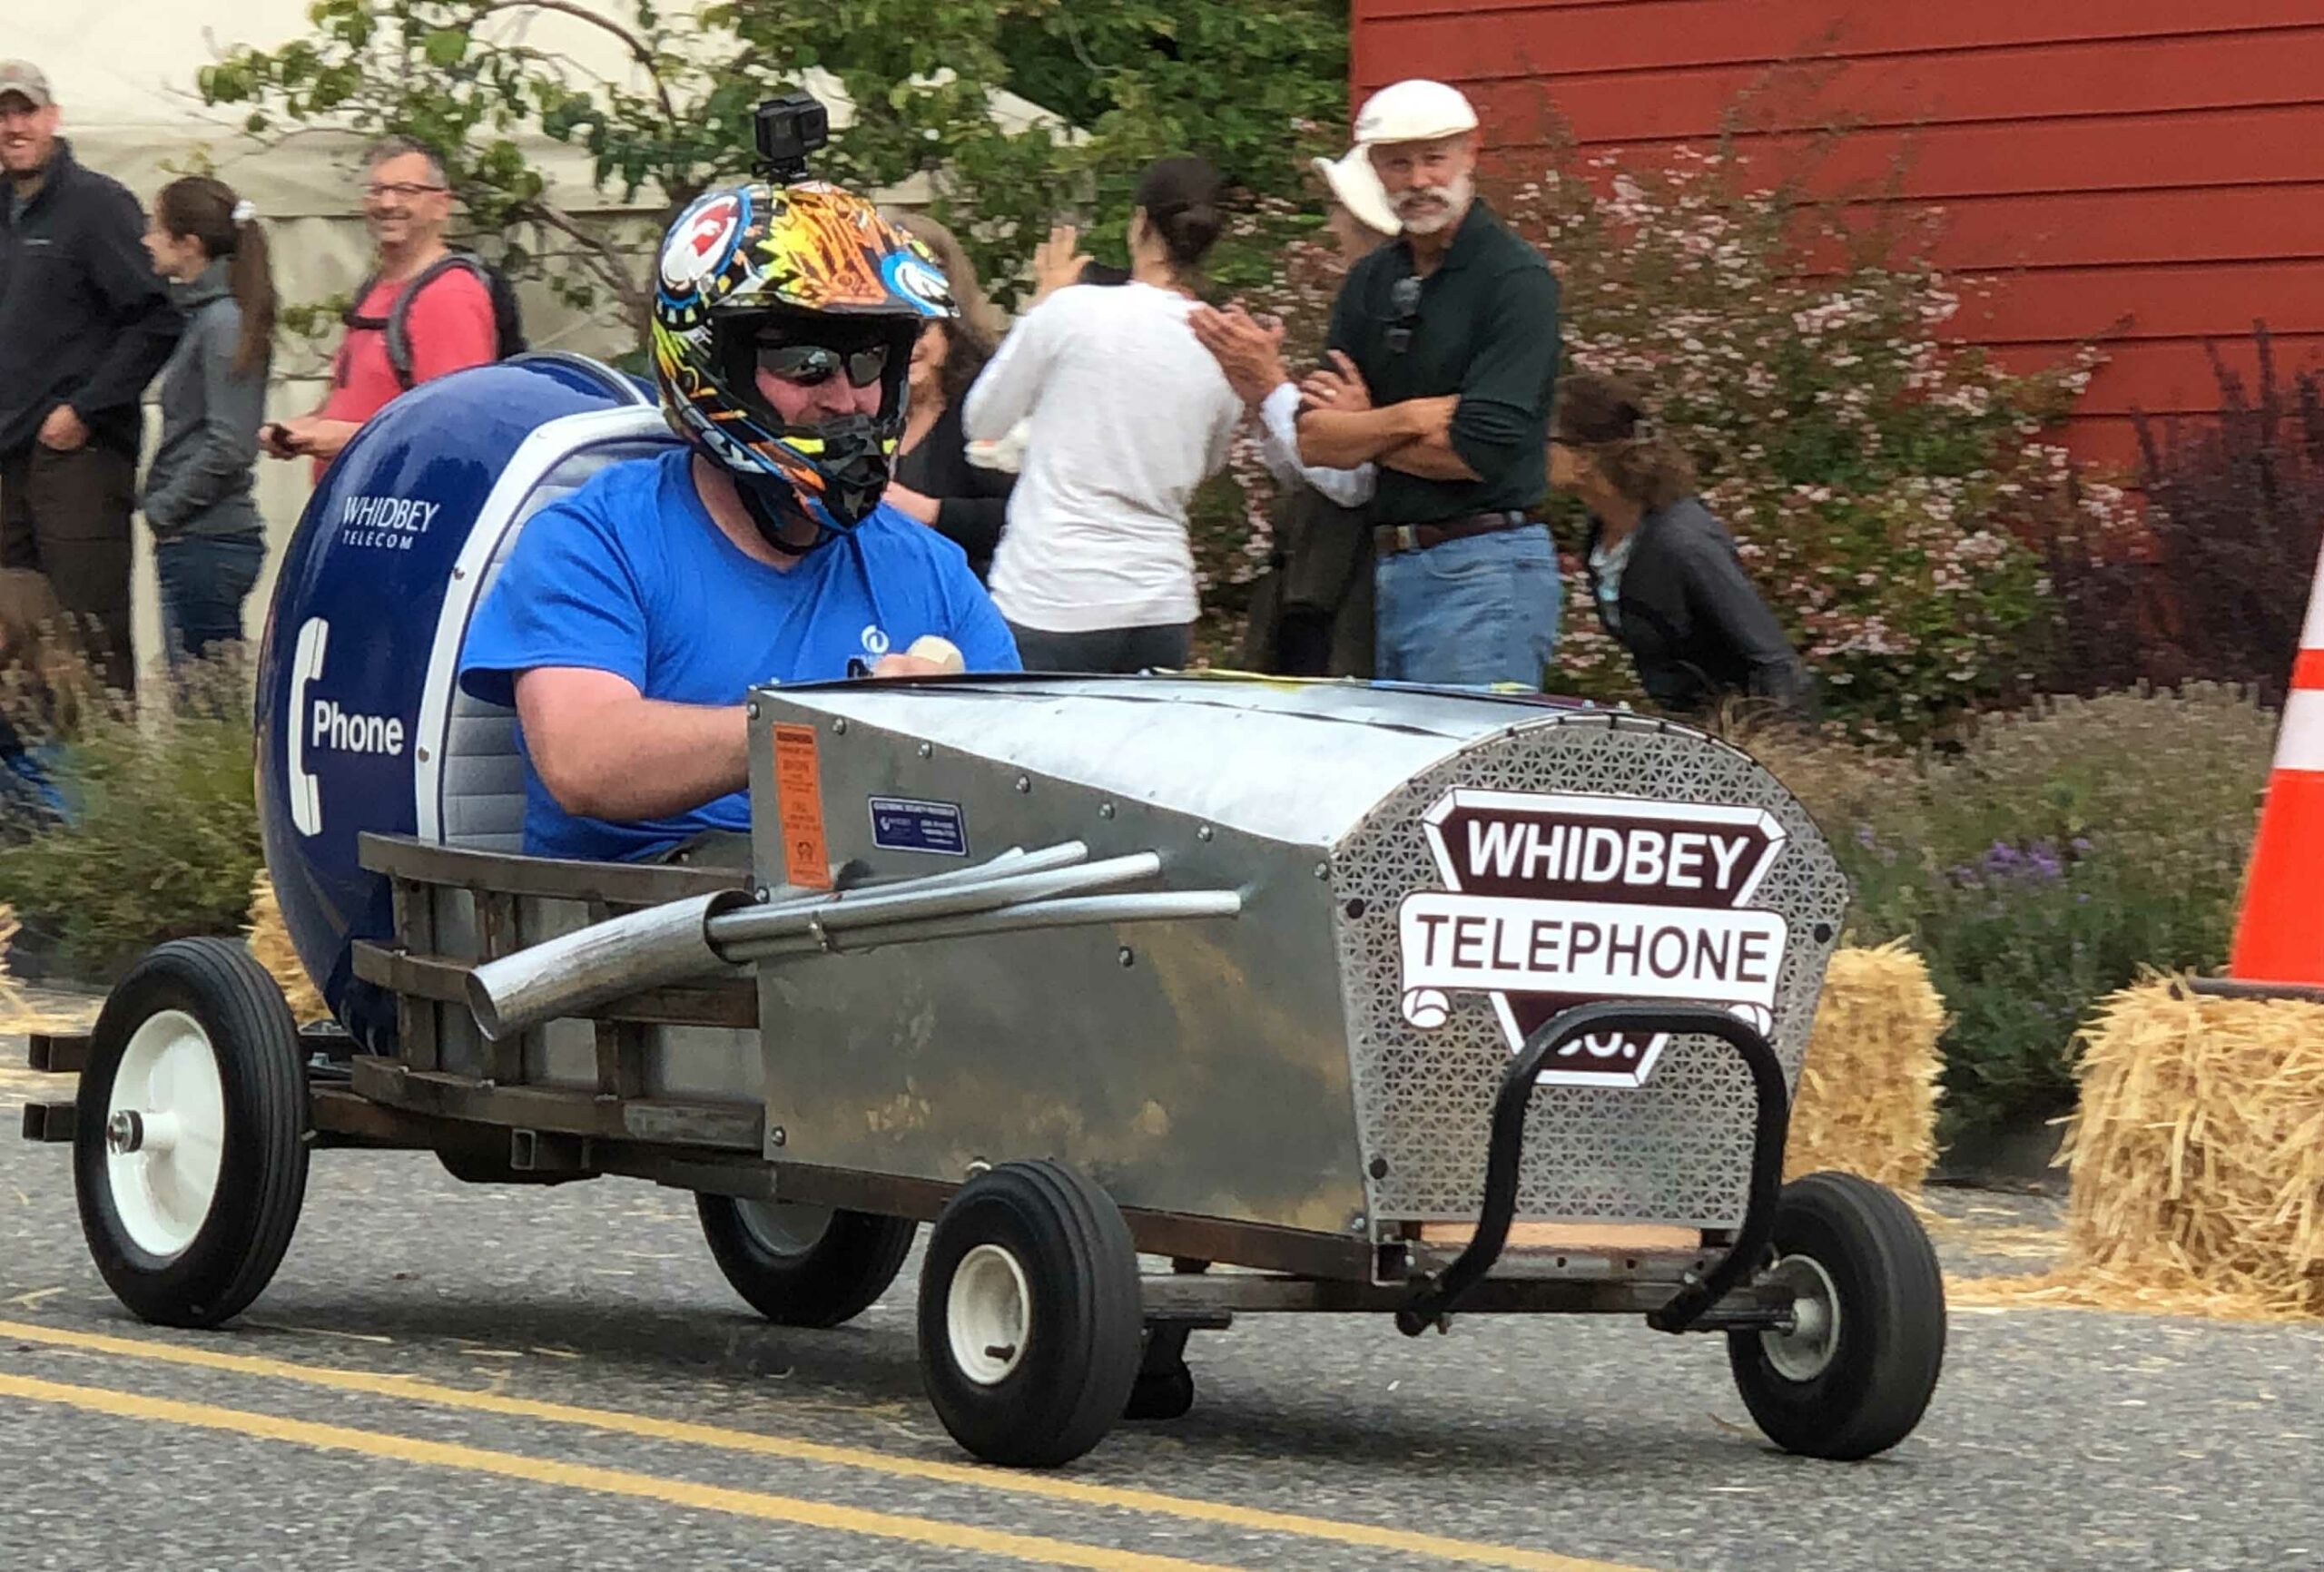 soup box derby event in Langley